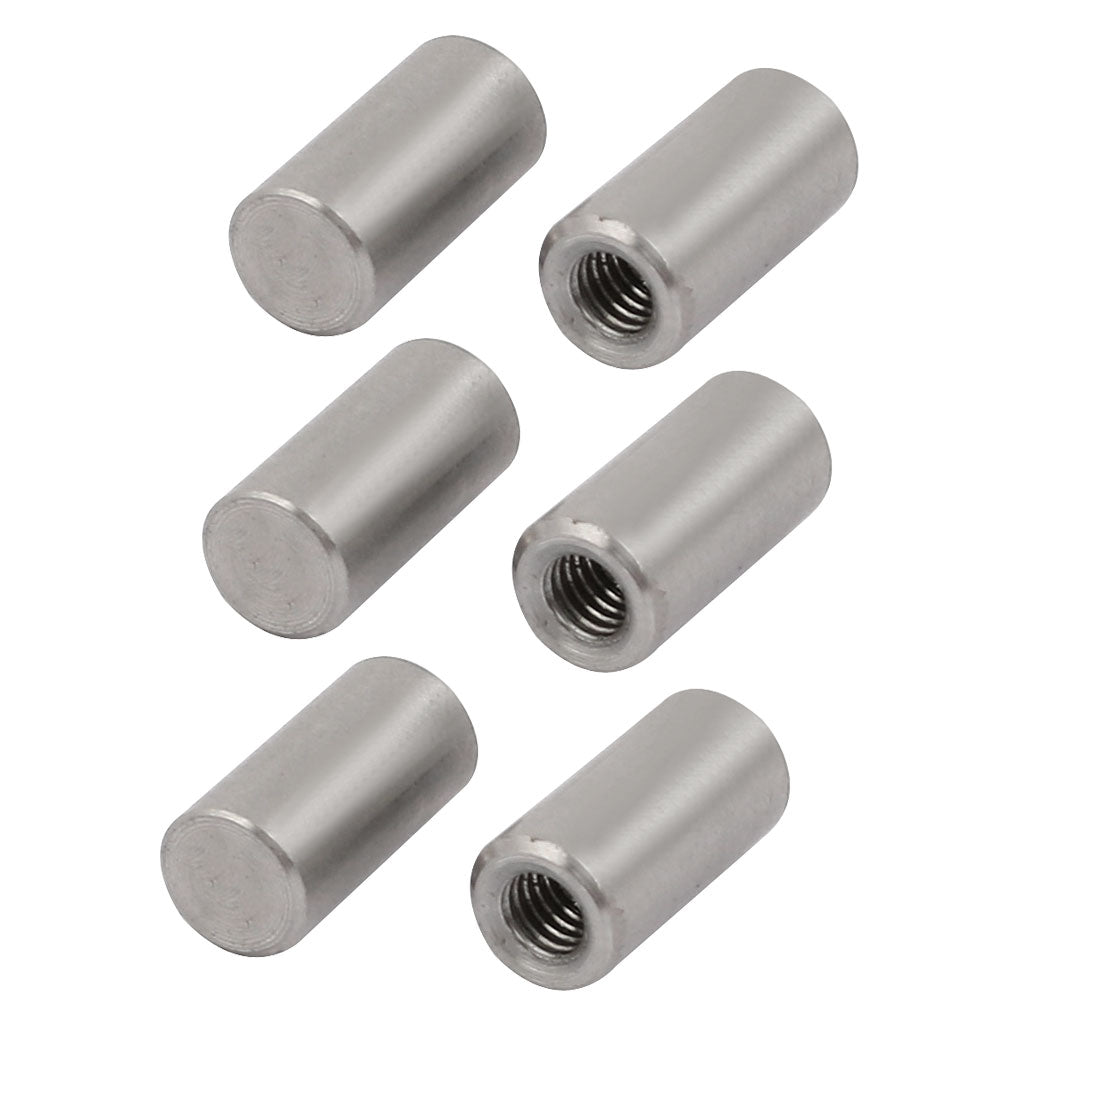 uxcell Uxcell 304 Stainless Steel M3 Female Thread 5mm x 10mm Cylindrical Dowel Pin 6pcs